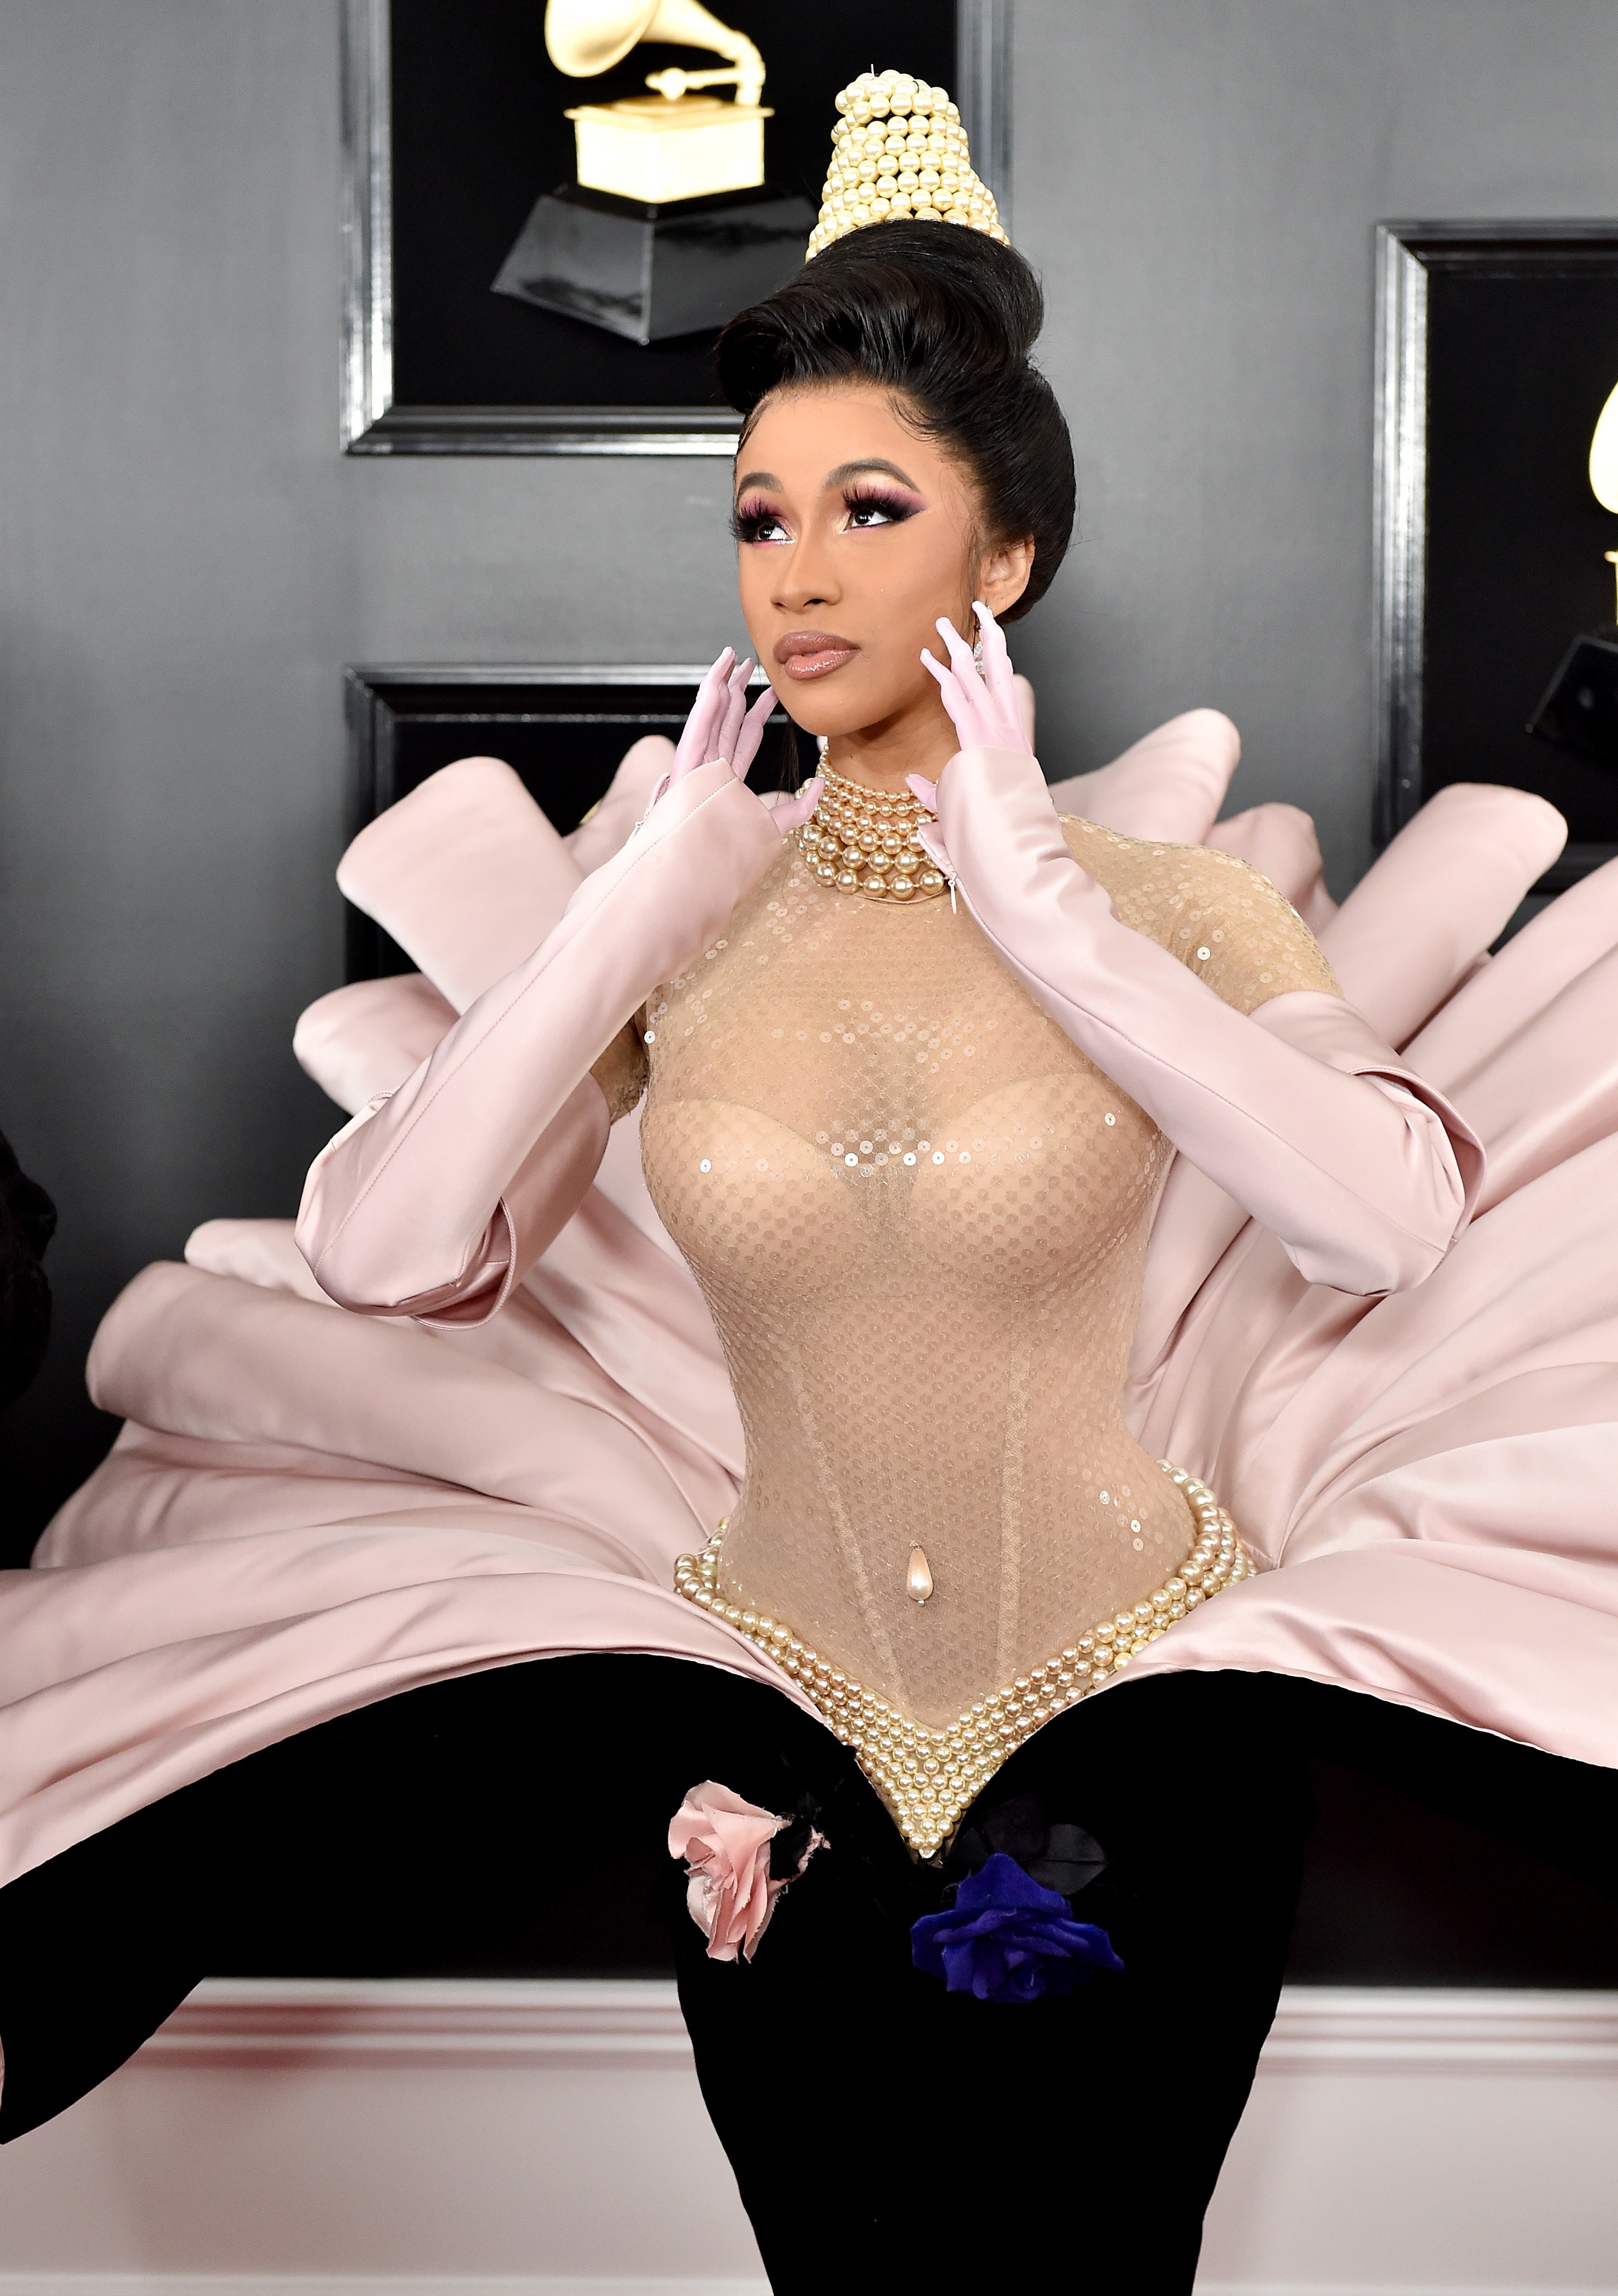 LOS ANGELES, CALIFORNIA - FEBRUARY 10: Cardi B attends the 61st Annual GRAMMY Awards at Staples Center on February 10, 2019 in Los Angeles, California. (Photo by Axelle/Bauer-Griffin/FilmMagic) (Foto: FilmMagic)